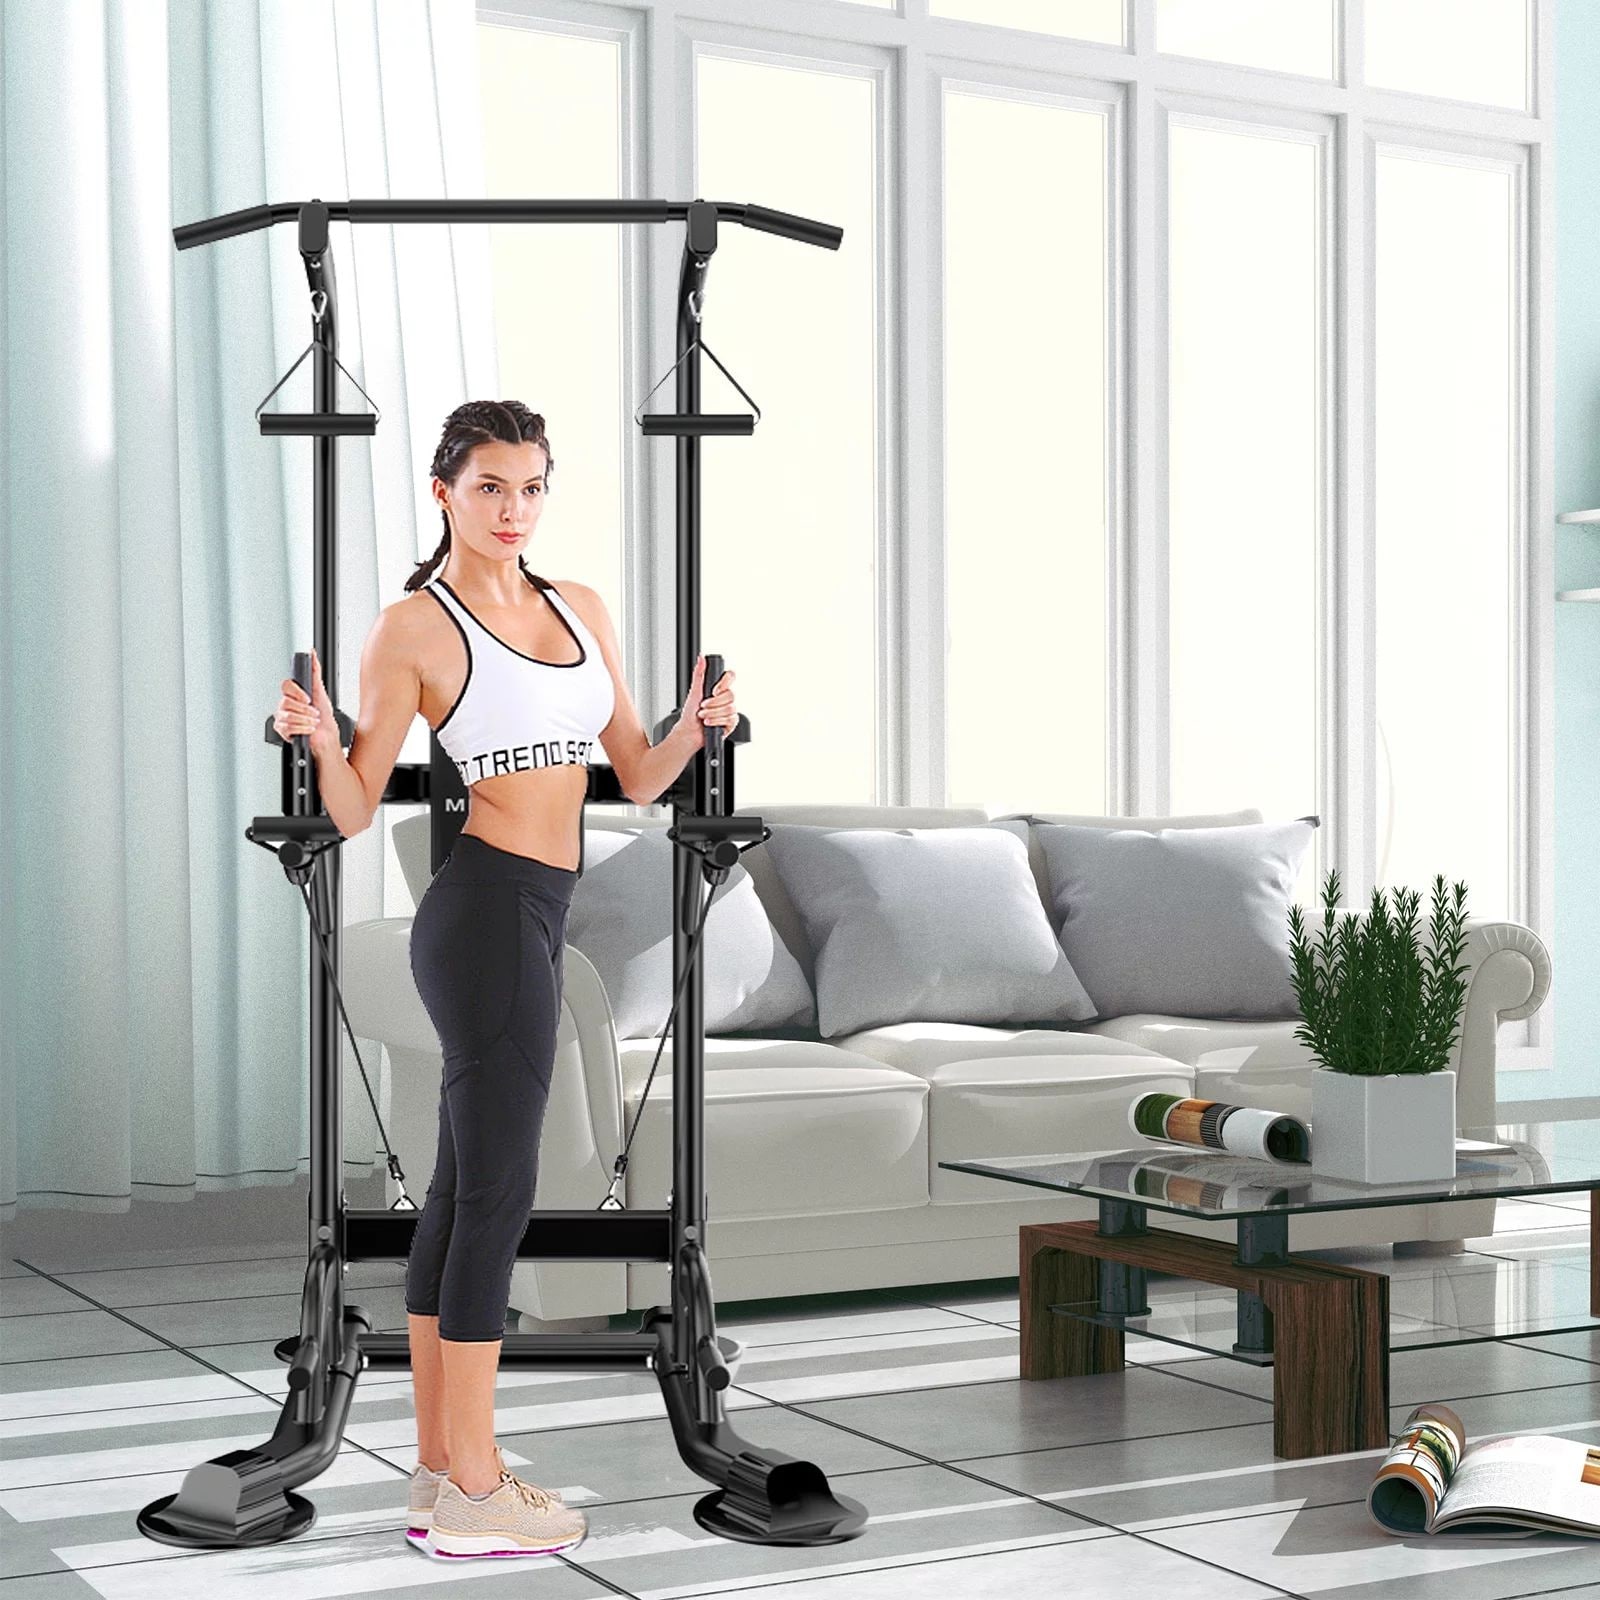 Power Tower -  - Professional Gym Equipment